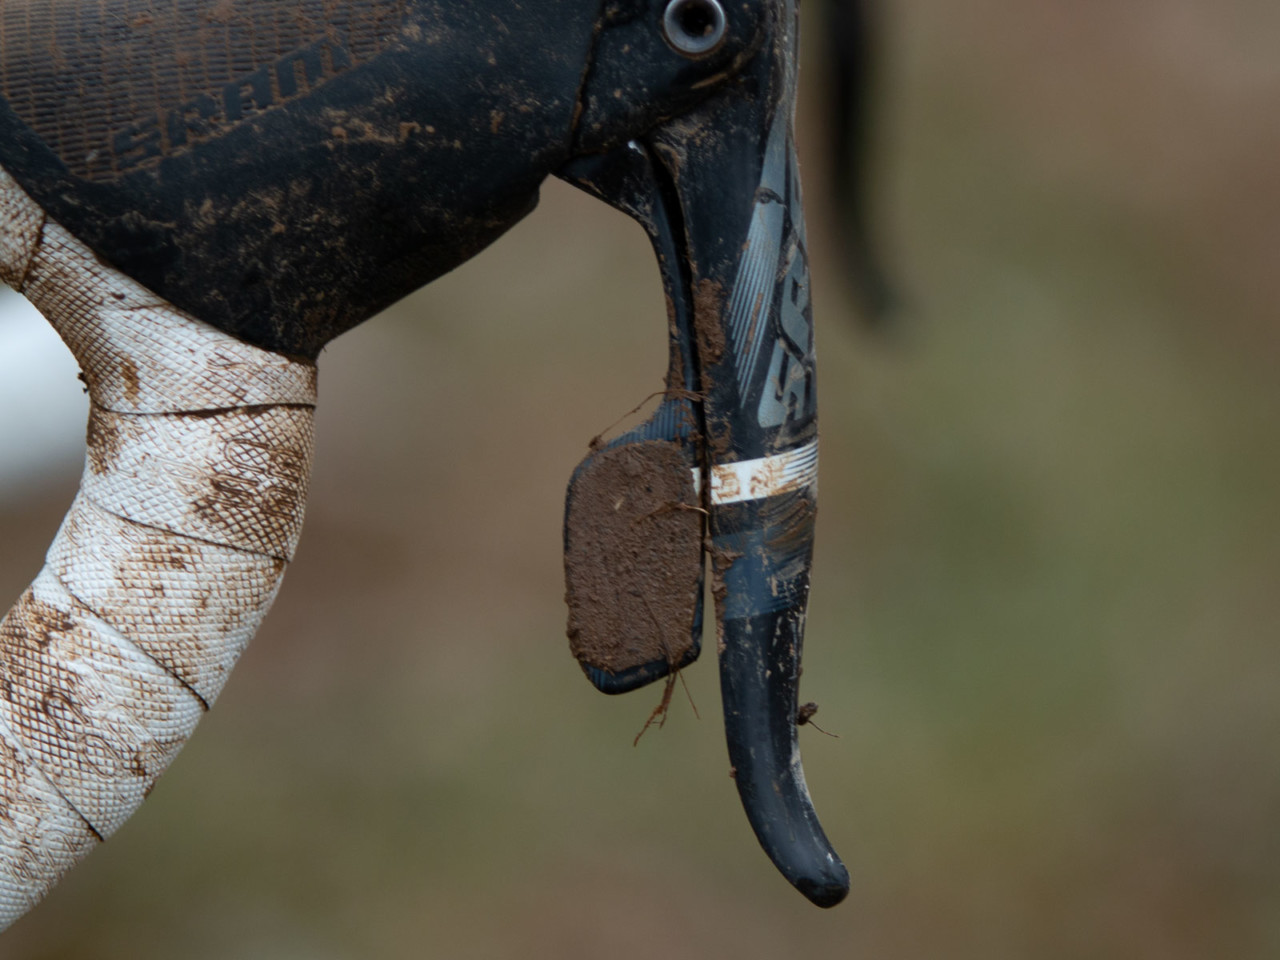 Mud at Nationals? His shifter paddle shows there was plenty. Stephen Hyde's title-winning Cannondale. 2018 Cyclocross National Championships V2. Louisville, KY. © Cyclocross Magazine